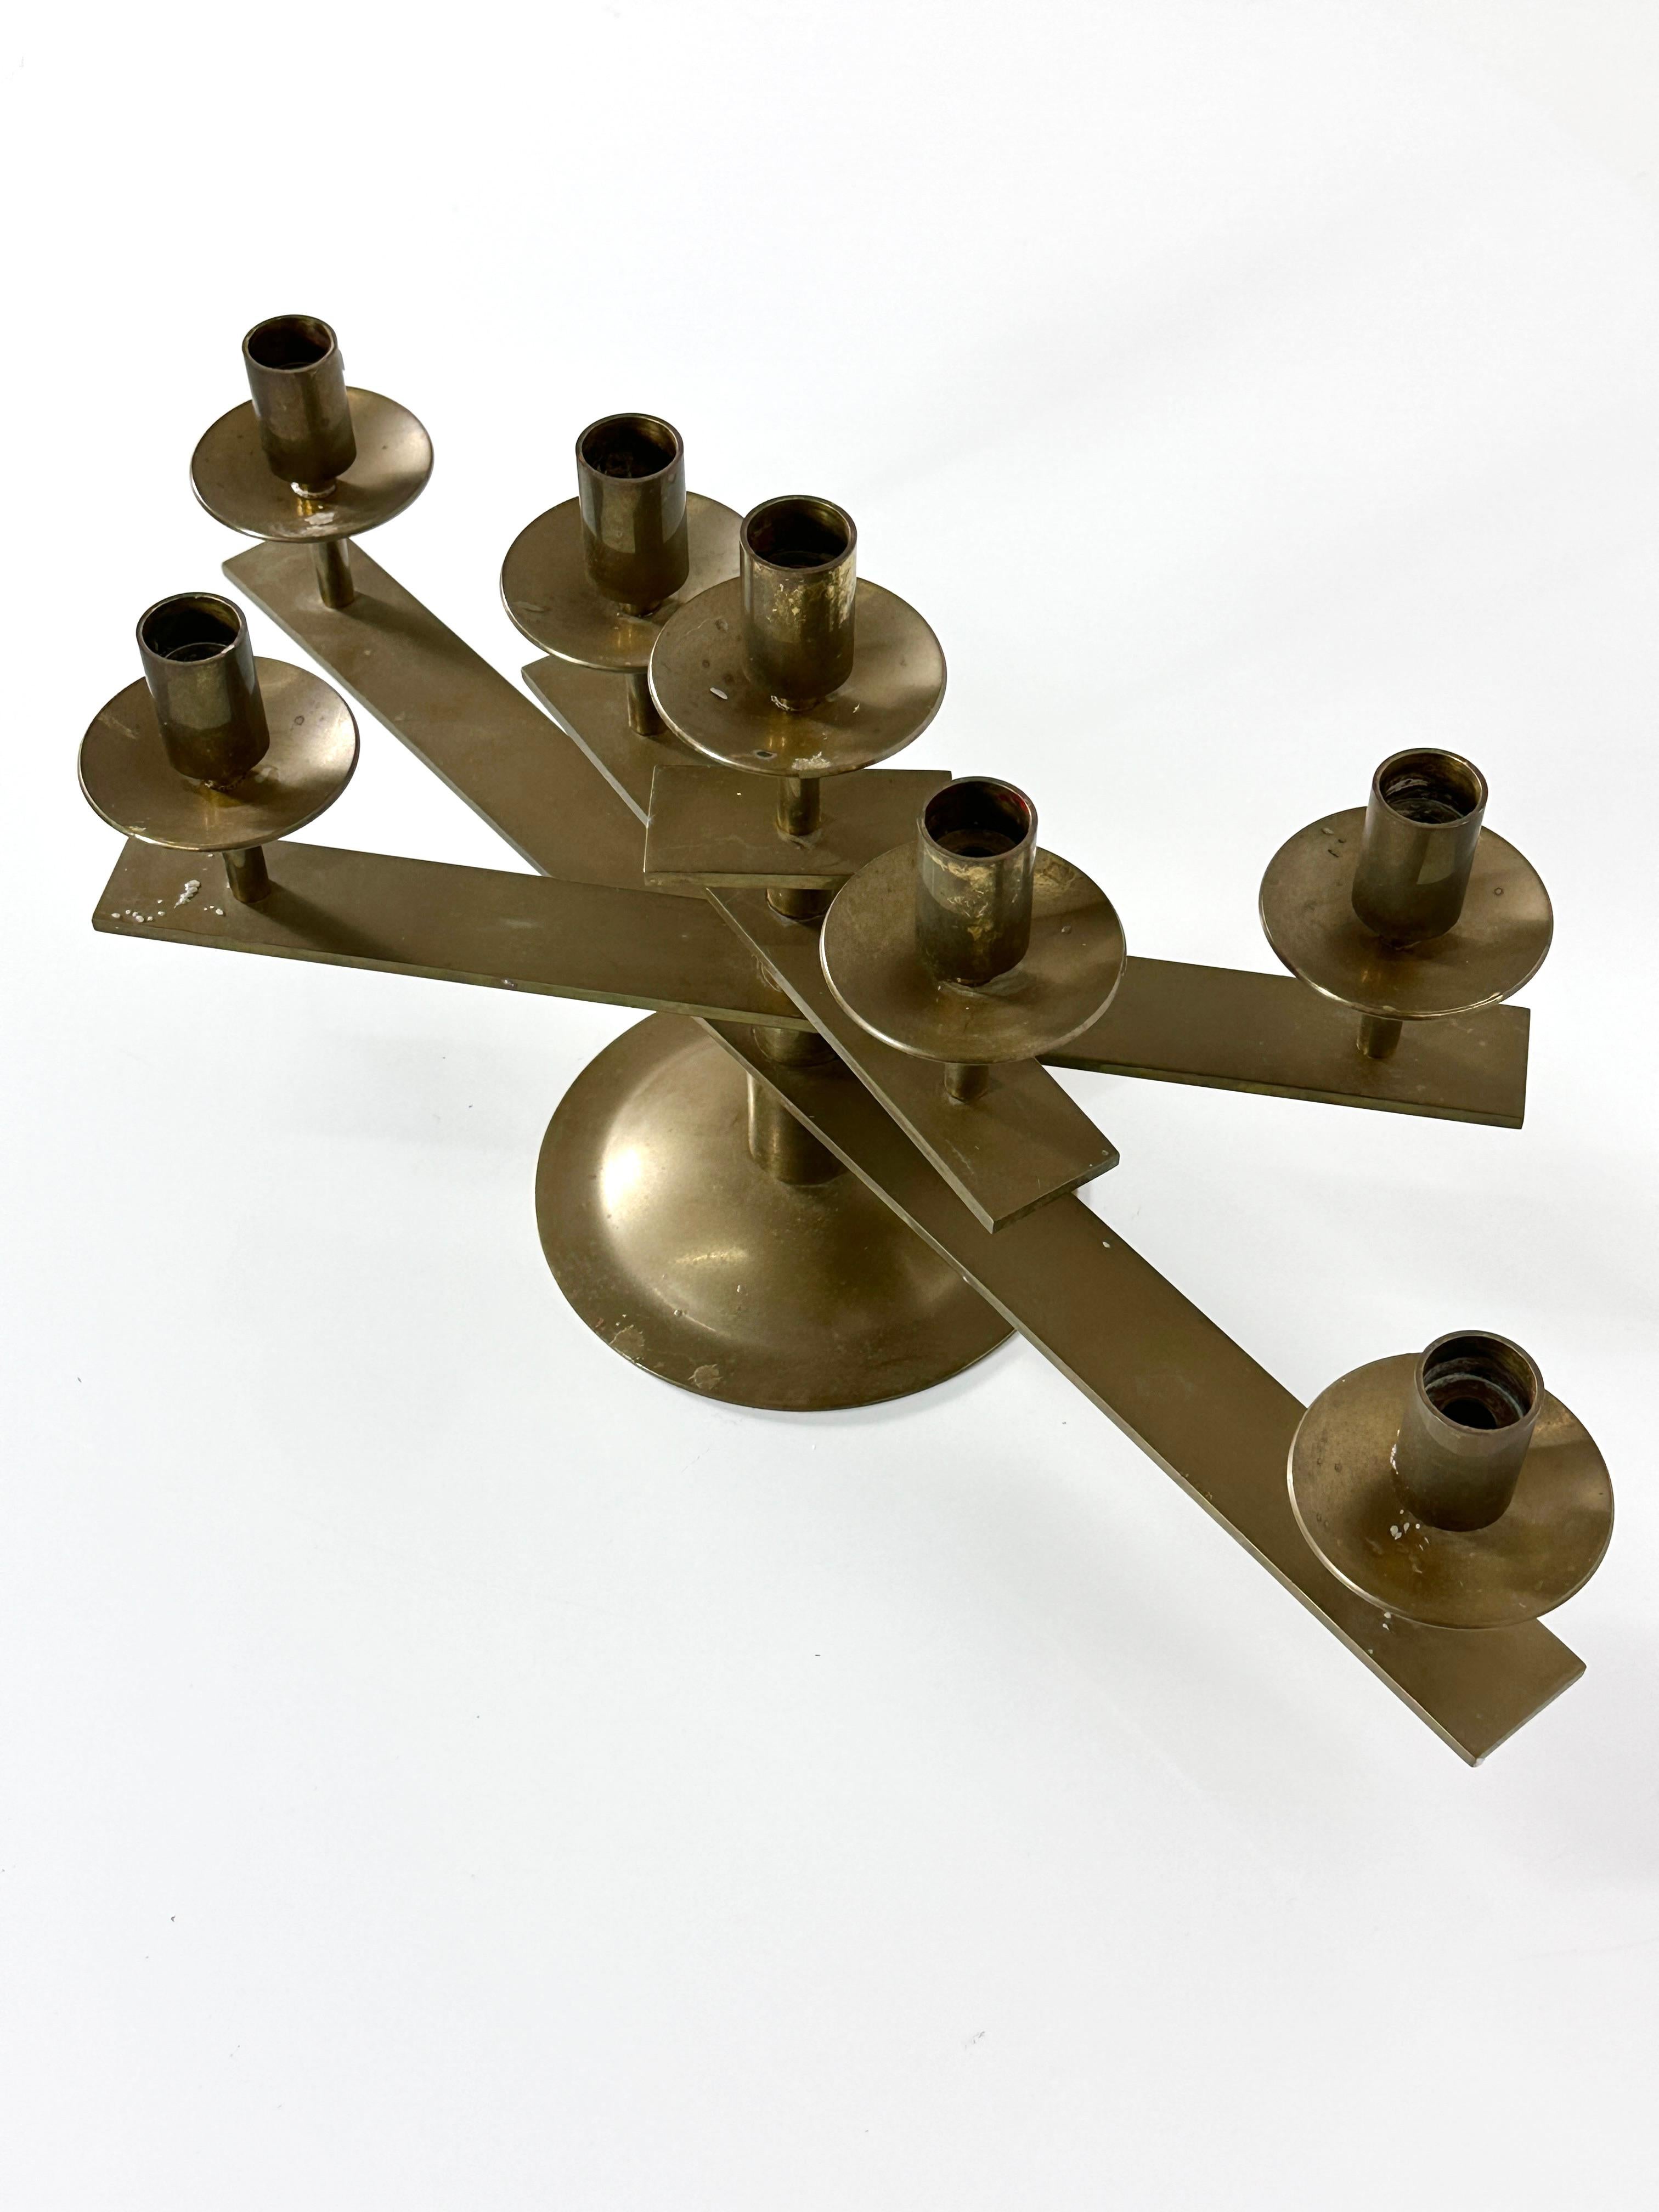 Scandinavian Modern Brass Articulated Candelabra Candle Holder Denmark 1960s In Good Condition For Sale In Troy, MI